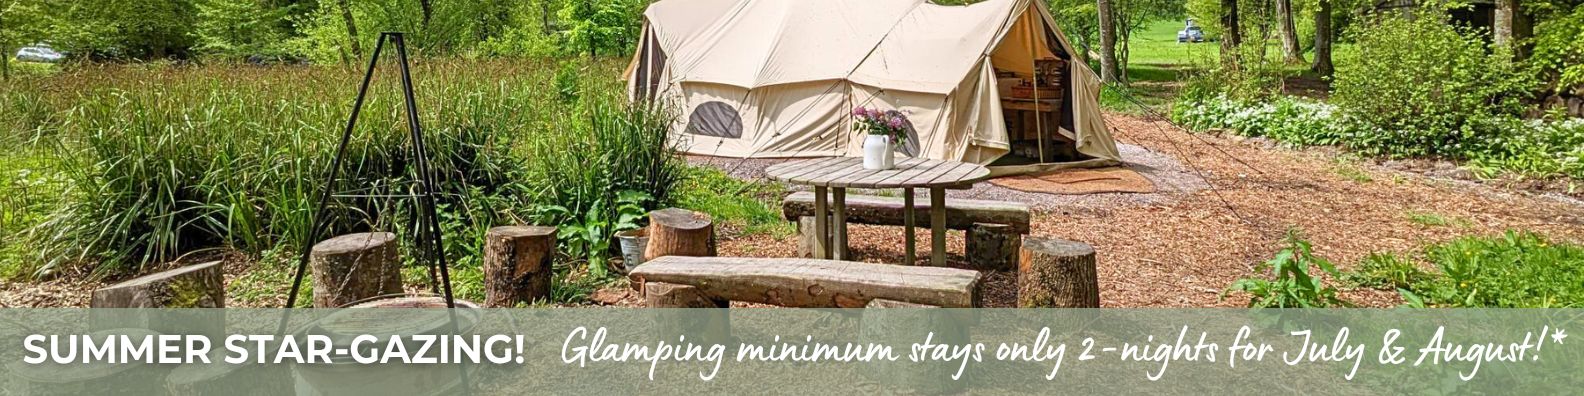 Wytch Wood Camping and Glamping | Somerset | Glamping minimum stays only 2 nights for July & August!